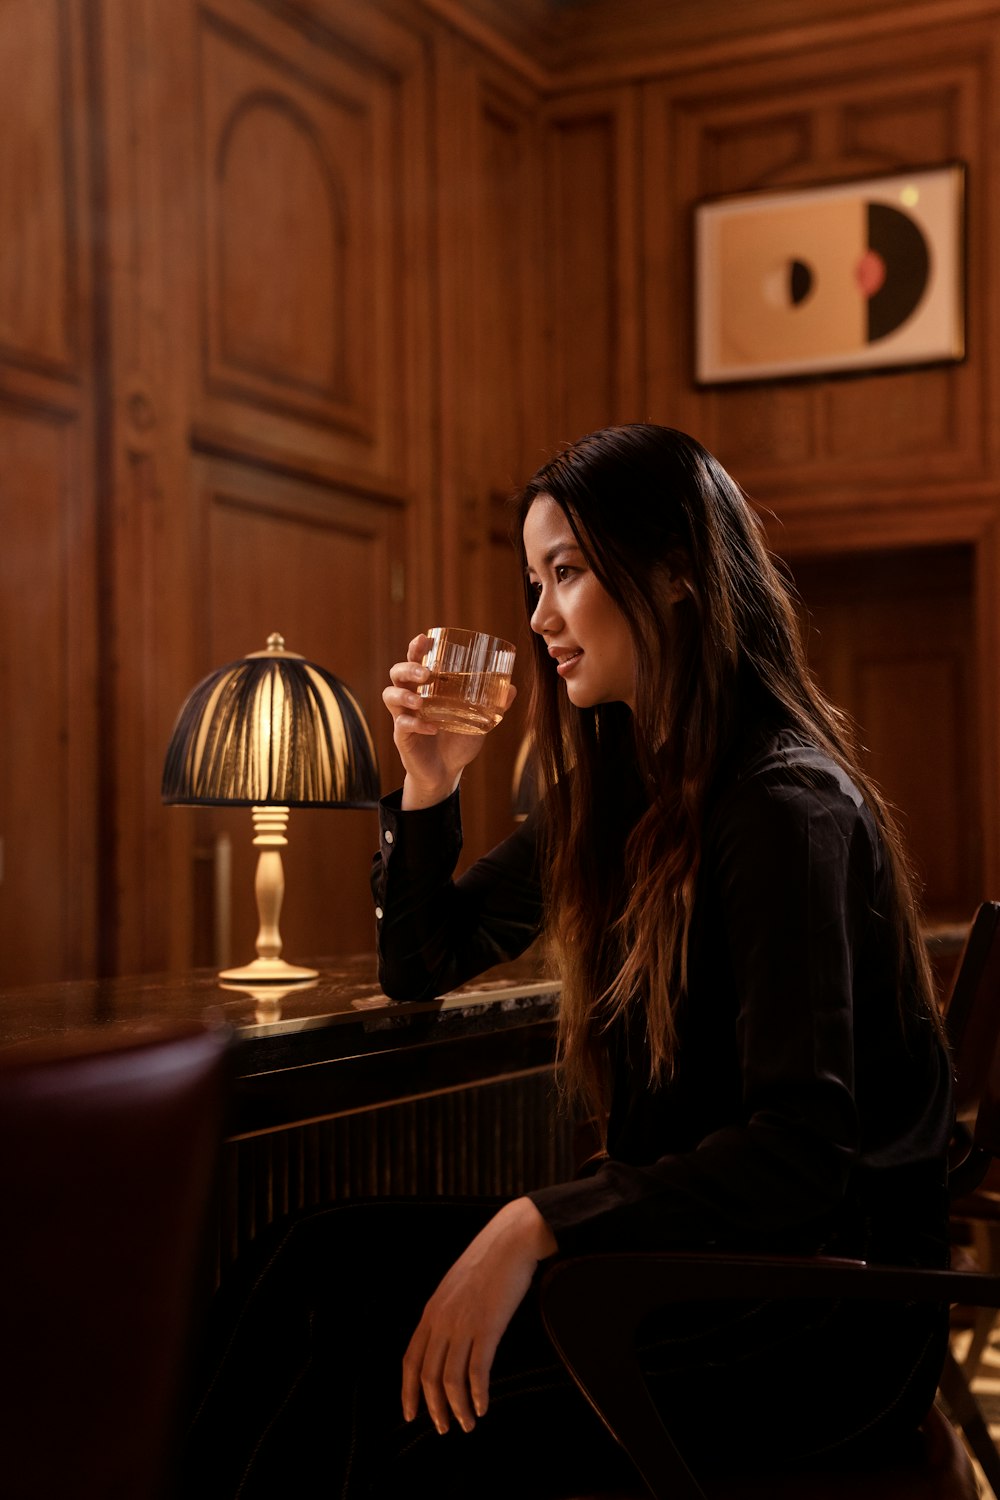 a woman sitting at a bar drinking a glass of wine